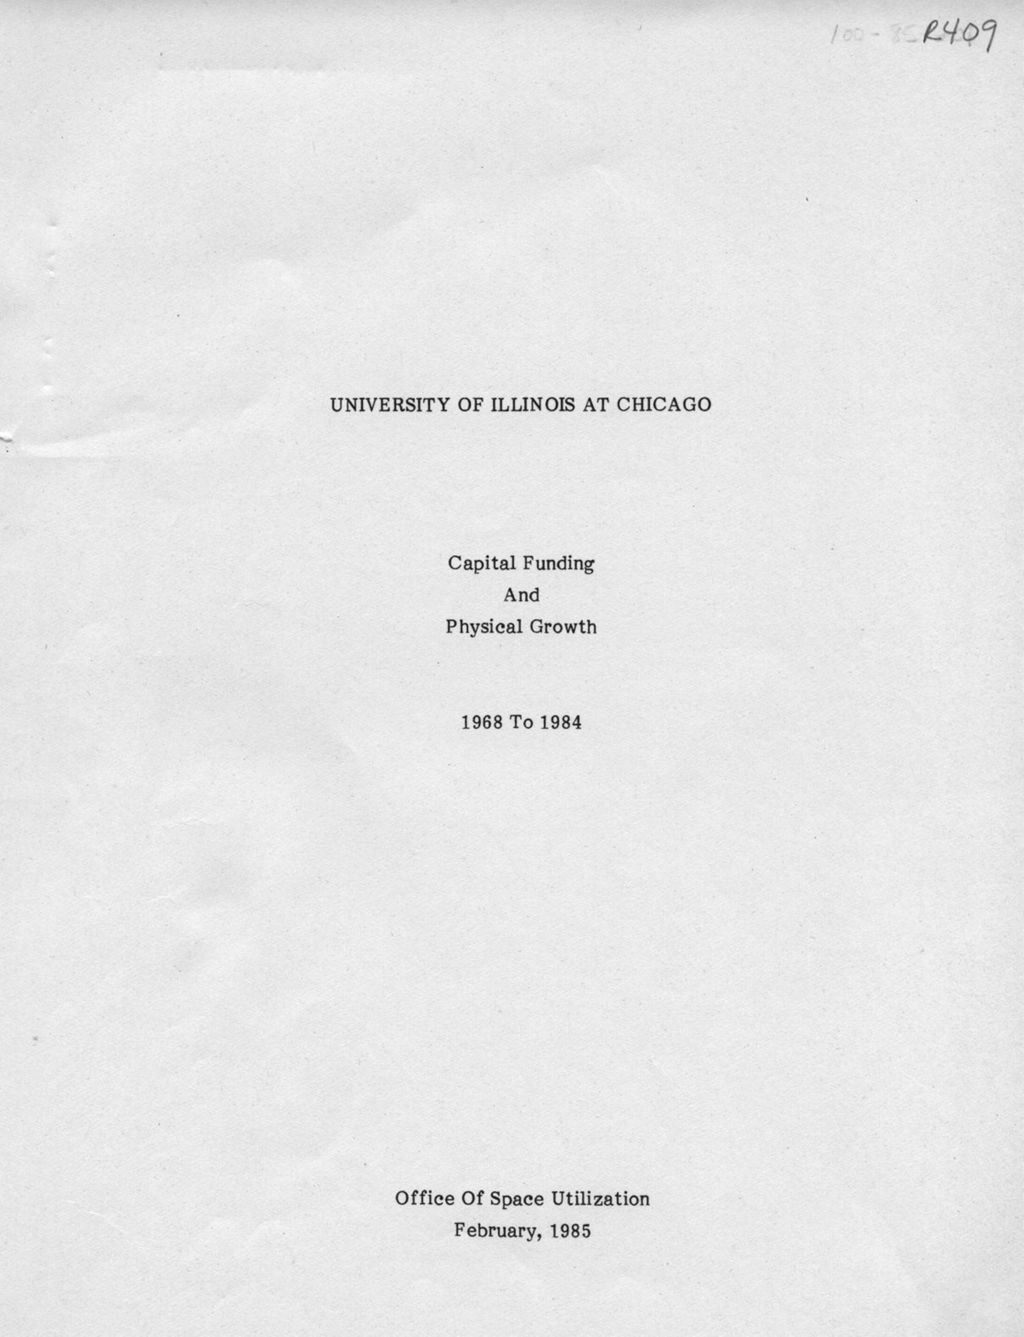 Miniature of University of Illinois at Chicago, Capital Funding and Physical Growth, 1968 To 1984